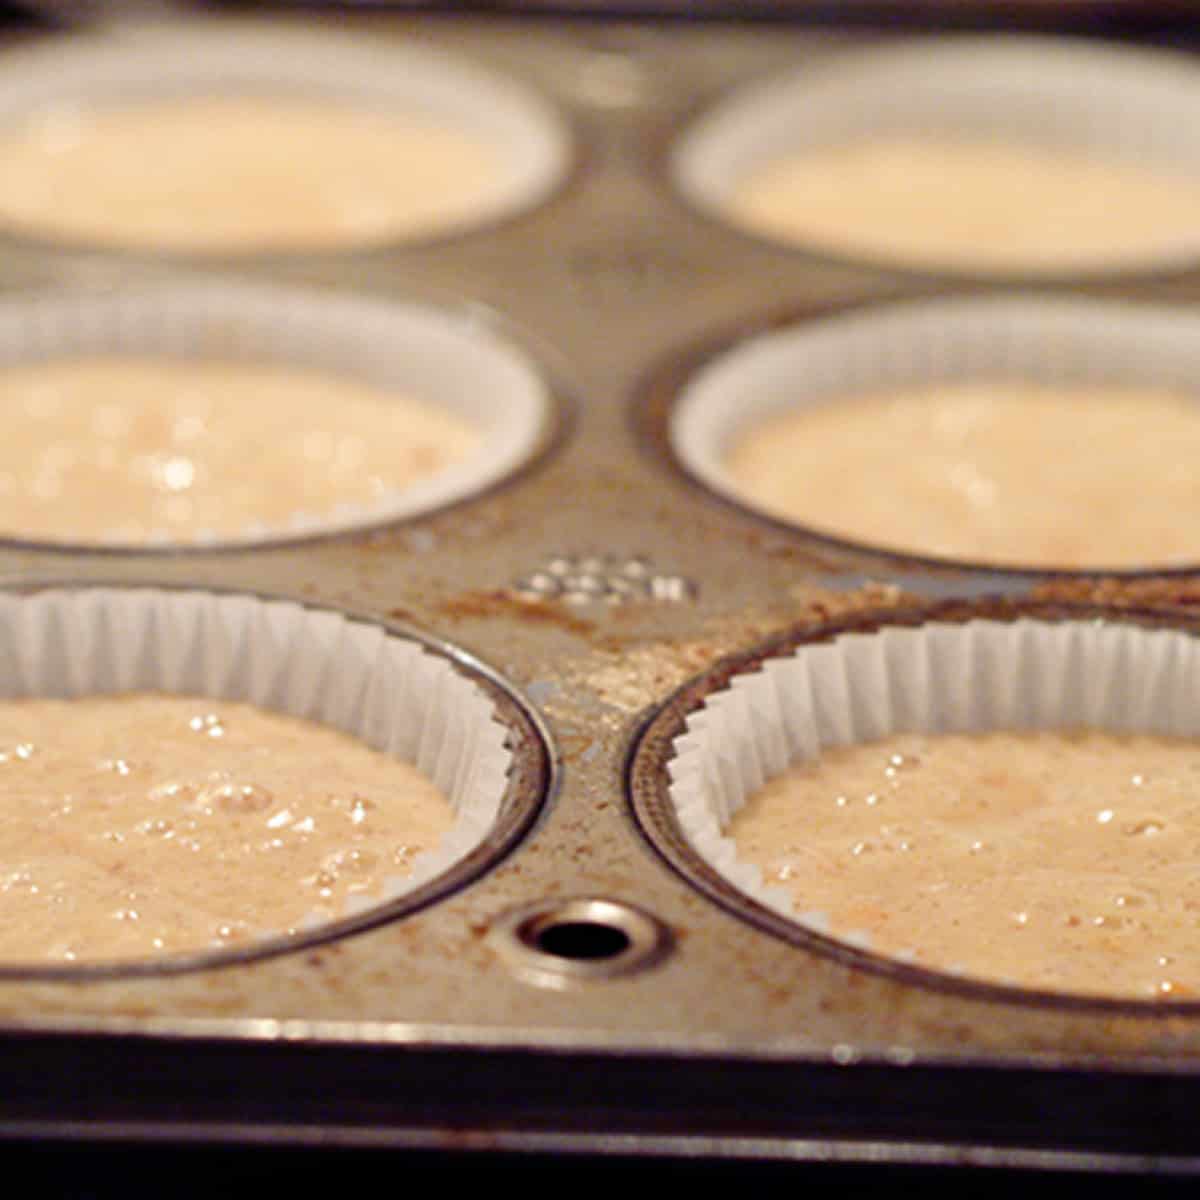 Muffin pan filled with batter.